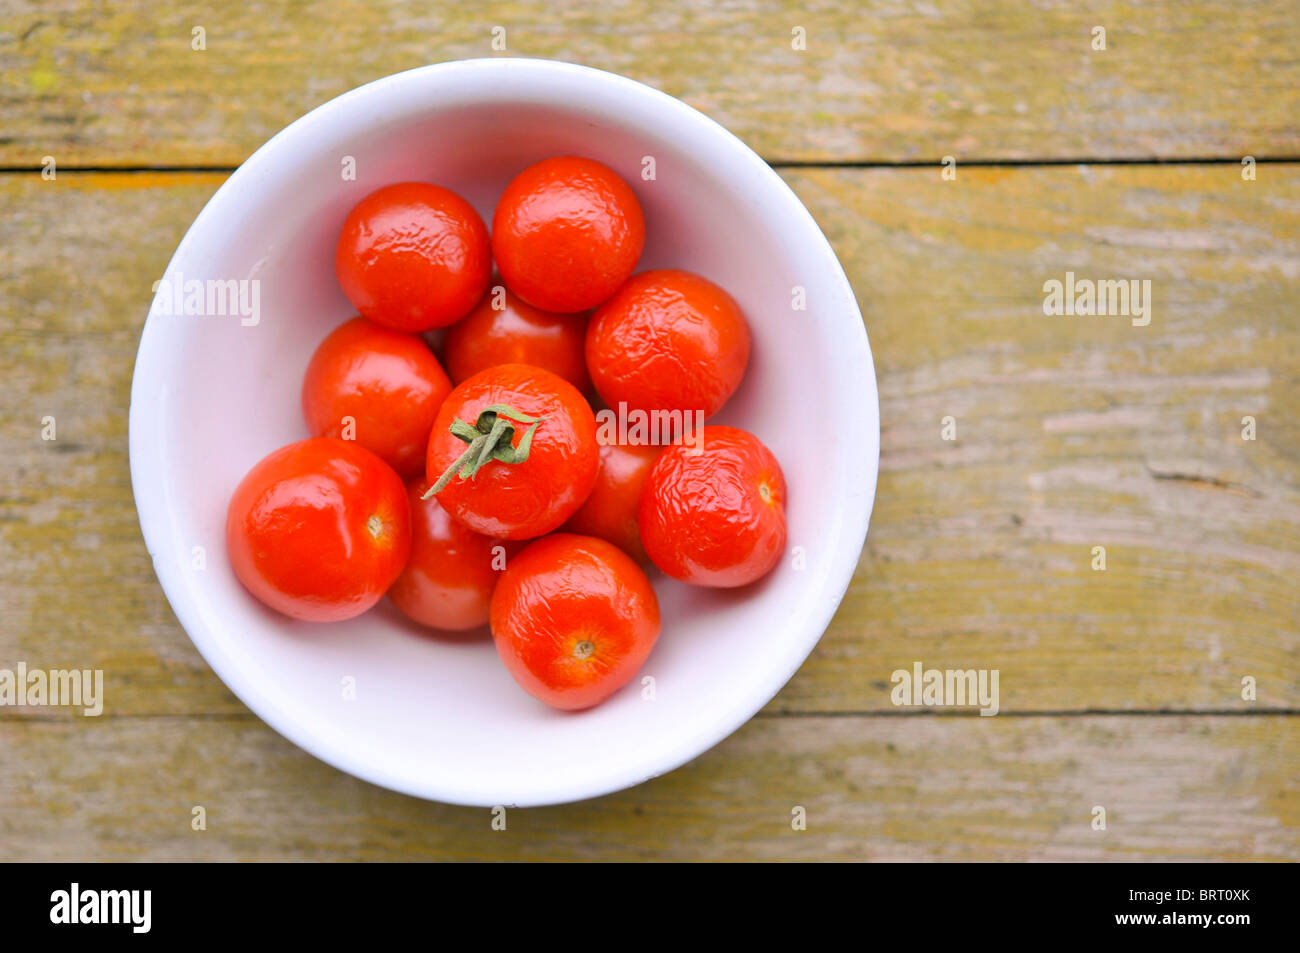 Overripe tomatoes in a bowl Stock Photo